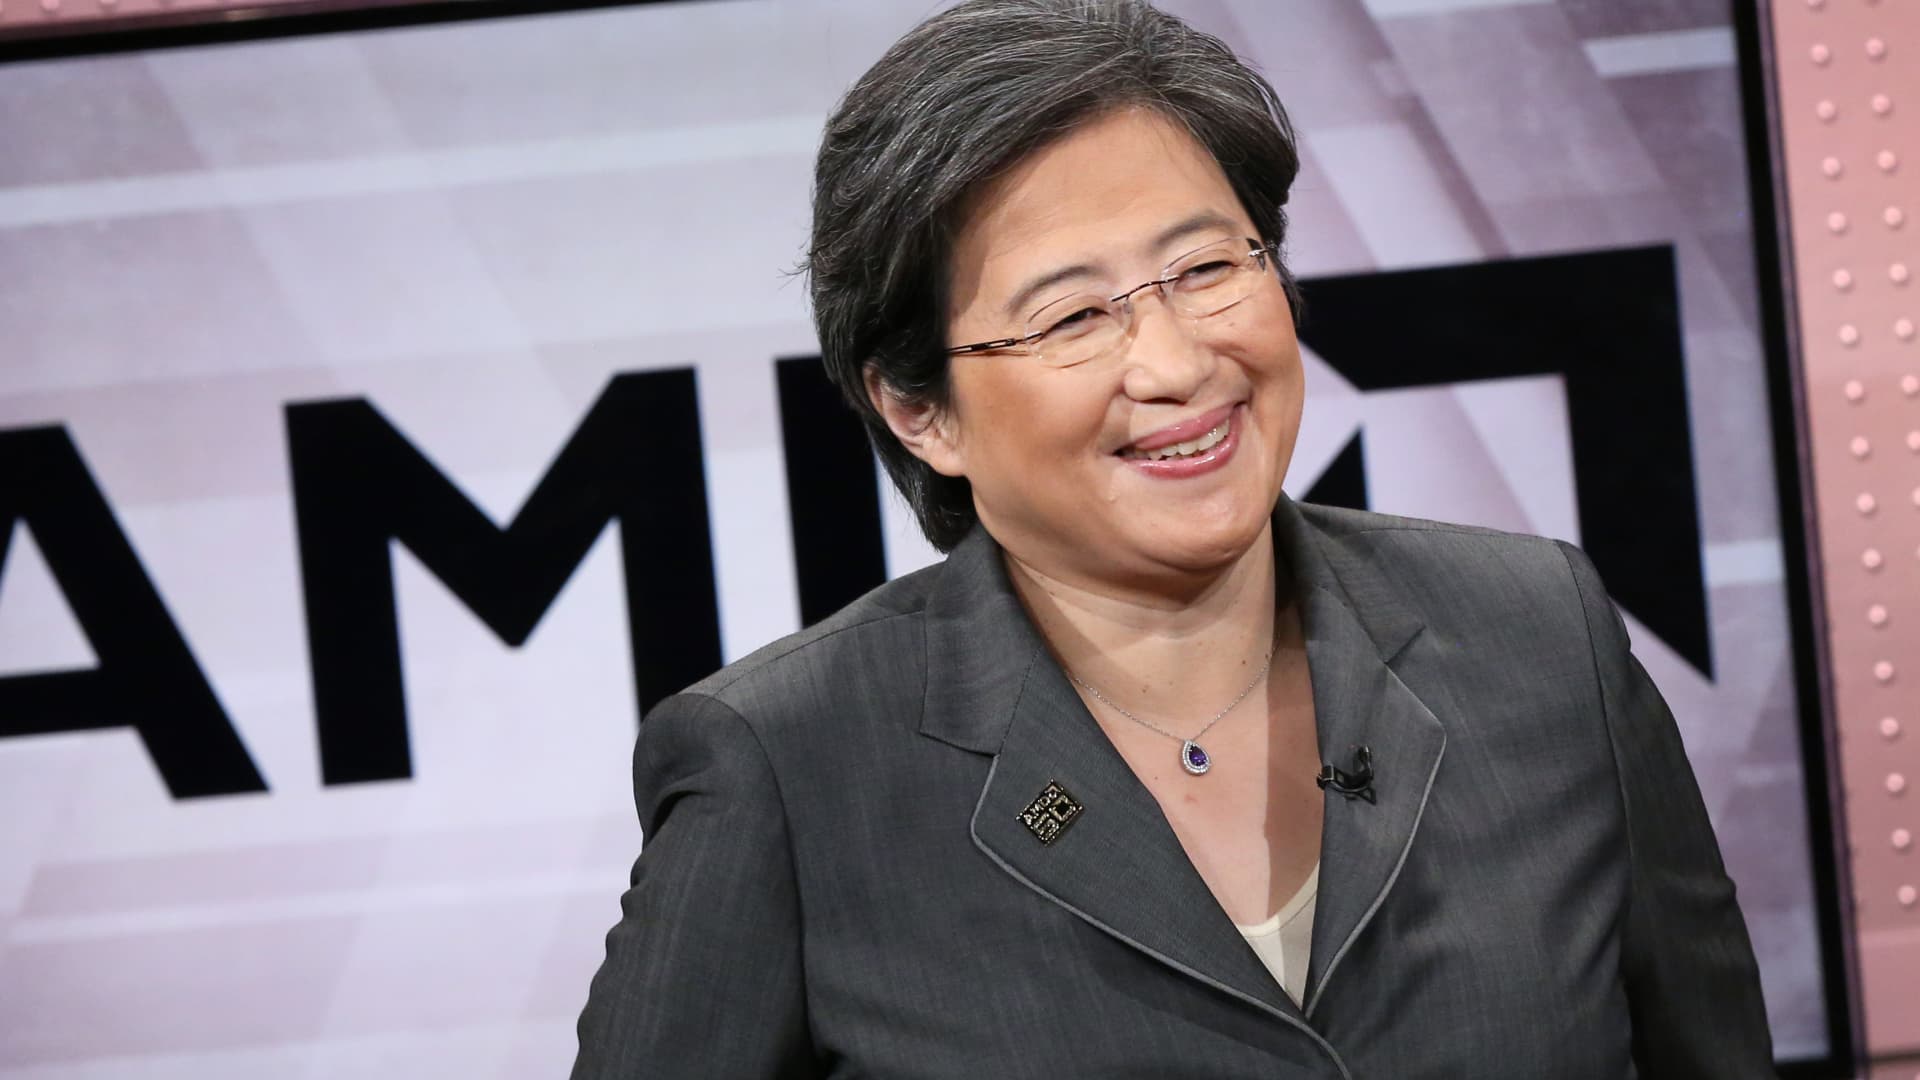 AMD jumps 8% on report Microsoft is collaborating on A.I. chip push